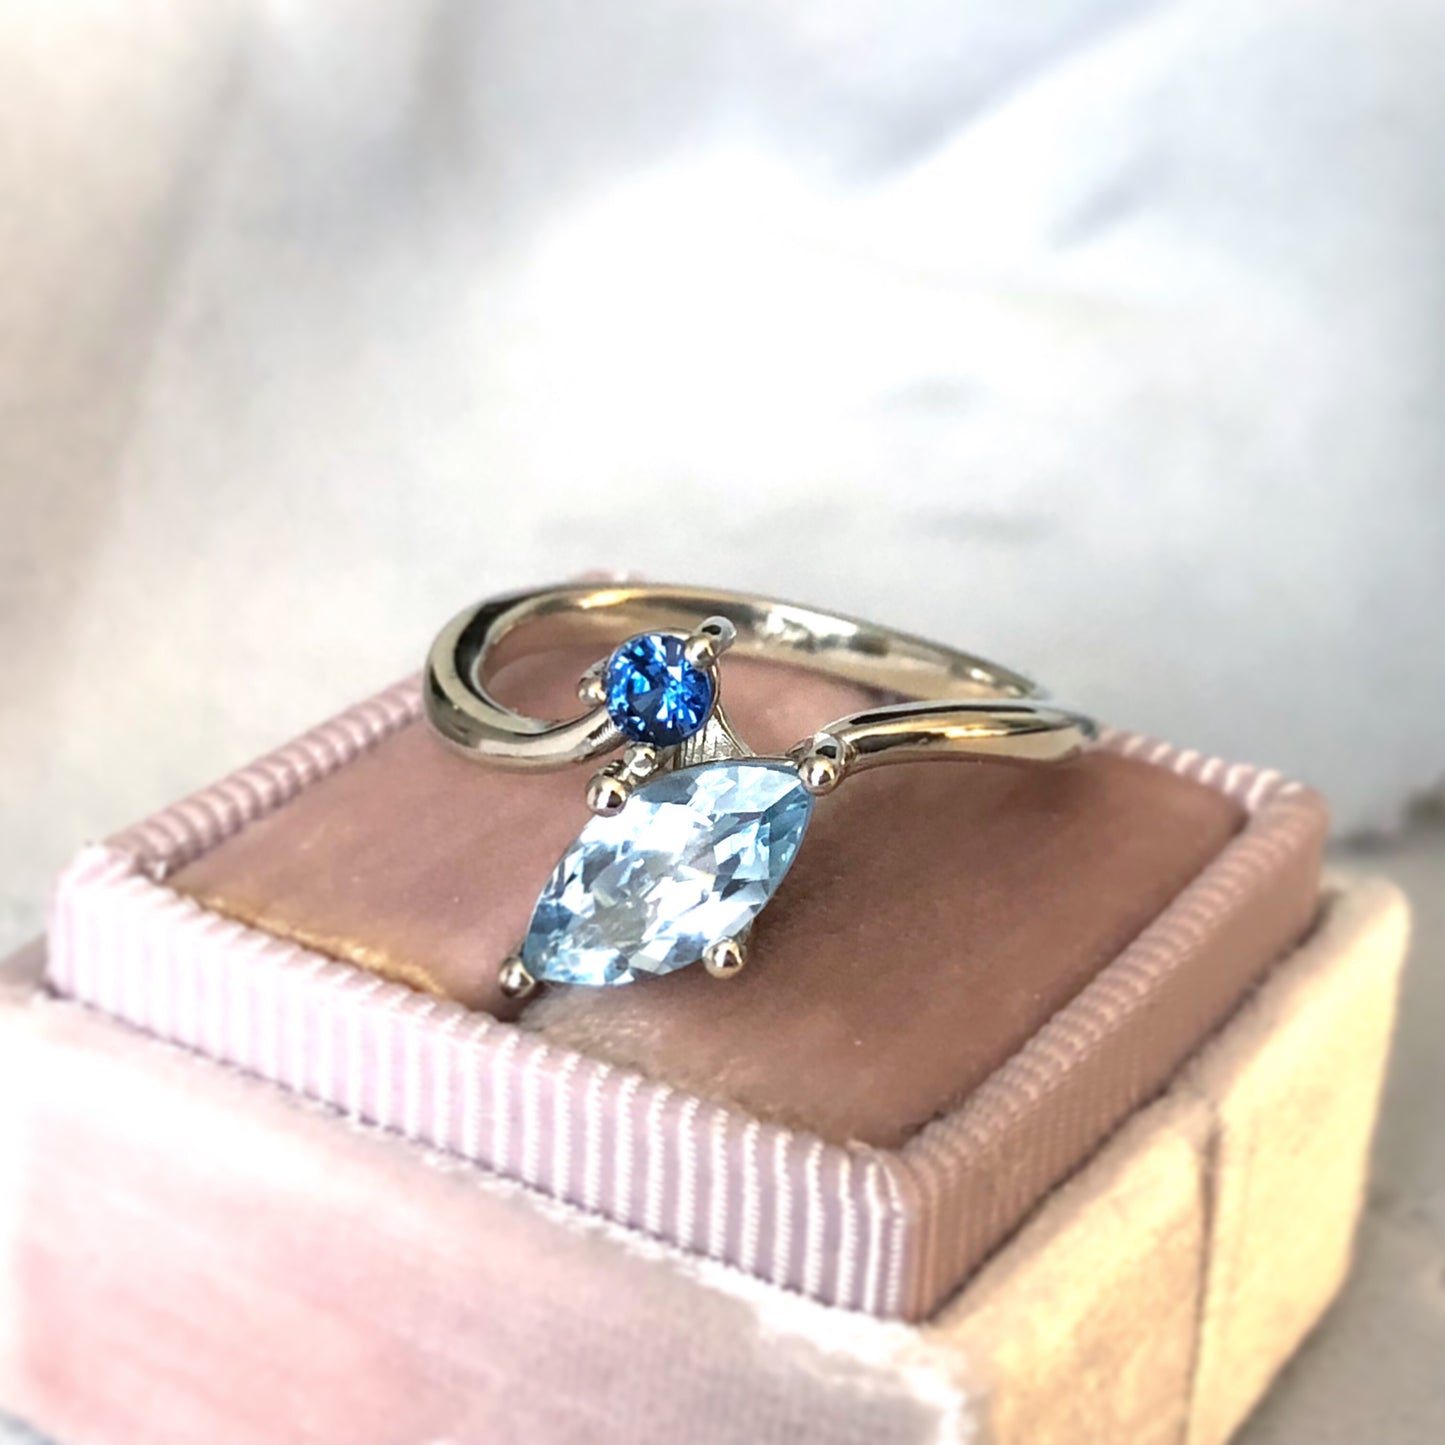 Aquamarine and Blue Sapphire Side by Side Ring Toi et Moi Style